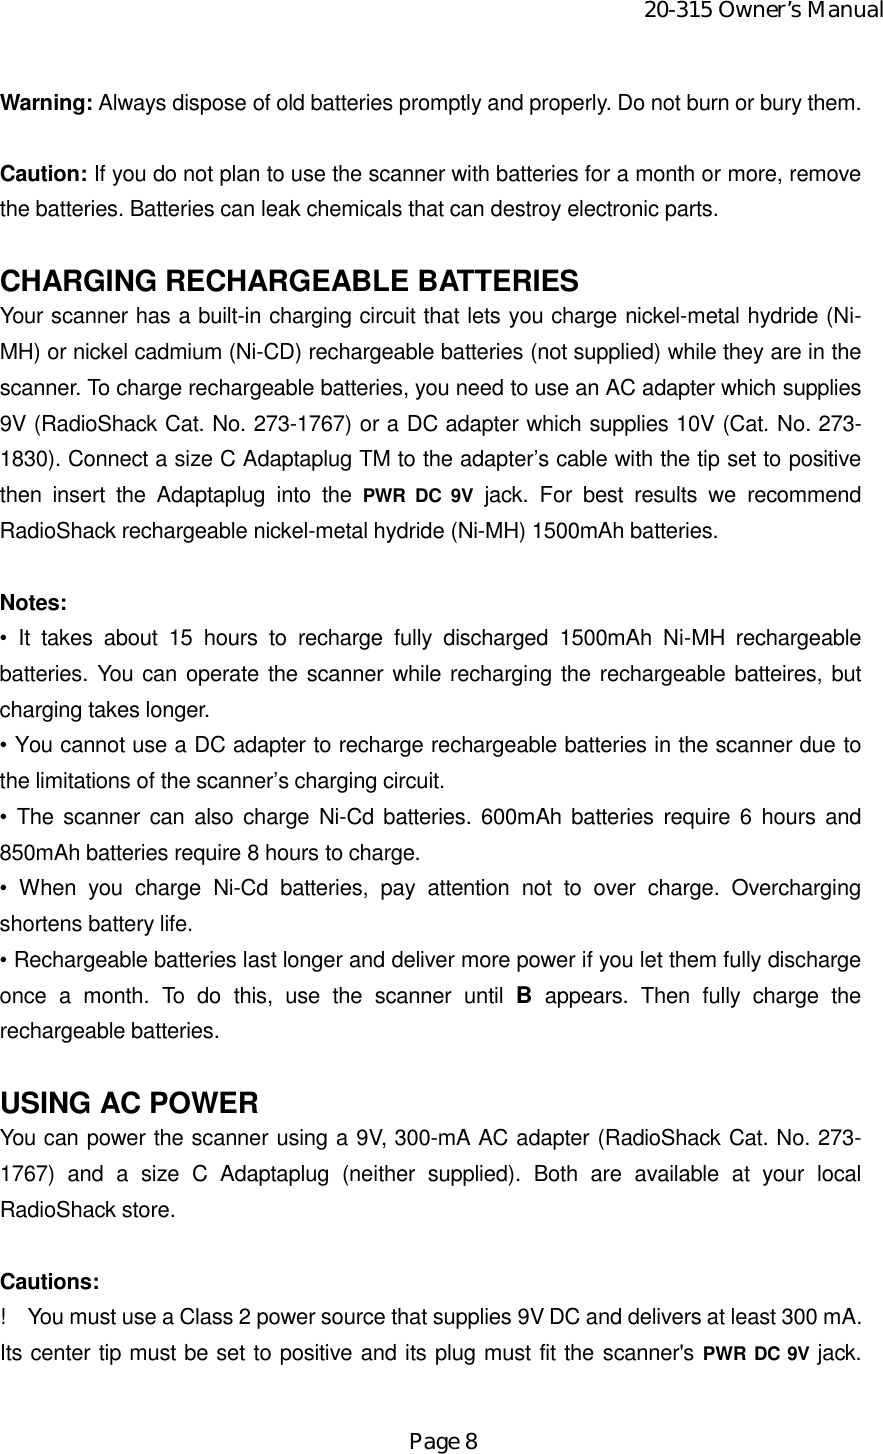 20-315 Owner’s ManualPage 8Warning: Always dispose of old batteries promptly and properly. Do not burn or bury them.Caution: If you do not plan to use the scanner with batteries for a month or more, removethe batteries. Batteries can leak chemicals that can destroy electronic parts.CHARGING RECHARGEABLE BATTERIESYour scanner has a built-in charging circuit that lets you charge nickel-metal hydride (Ni-MH) or nickel cadmium (Ni-CD) rechargeable batteries (not supplied) while they are in thescanner. To charge rechargeable batteries, you need to use an AC adapter which supplies9V (RadioShack Cat. No. 273-1767) or a DC adapter which supplies 10V (Cat. No. 273-1830). Connect a size C Adaptaplug TM to the adapter’s cable with the tip set to positivethen insert the Adaptaplug into the PWR DC 9V jack. For best results we recommendRadioShack rechargeable nickel-metal hydride (Ni-MH) 1500mAh batteries.Notes:• It takes about 15 hours to recharge fully discharged 1500mAh Ni-MH rechargeablebatteries. You can operate the scanner while recharging the rechargeable batteires, butcharging takes longer.• You cannot use a DC adapter to recharge rechargeable batteries in the scanner due tothe limitations of the scanner’s charging circuit.• The scanner can also charge Ni-Cd batteries. 600mAh batteries require 6 hours and850mAh batteries require 8 hours to charge.• When you charge Ni-Cd batteries, pay attention not to over charge. Overchargingshortens battery life.• Rechargeable batteries last longer and deliver more power if you let them fully dischargeonce a month. To do this, use the scanner until B appears. Then fully charge therechargeable batteries.USING AC POWERYou can power the scanner using a 9V, 300-mA AC adapter (RadioShack Cat. No. 273-1767) and a size C Adaptaplug (neither supplied). Both are available at your localRadioShack store.Cautions:!    You must use a Class 2 power source that supplies 9V DC and delivers at least 300 mA.Its center tip must be set to positive and its plug must fit the scanner&apos;s PWR DC 9V jack.